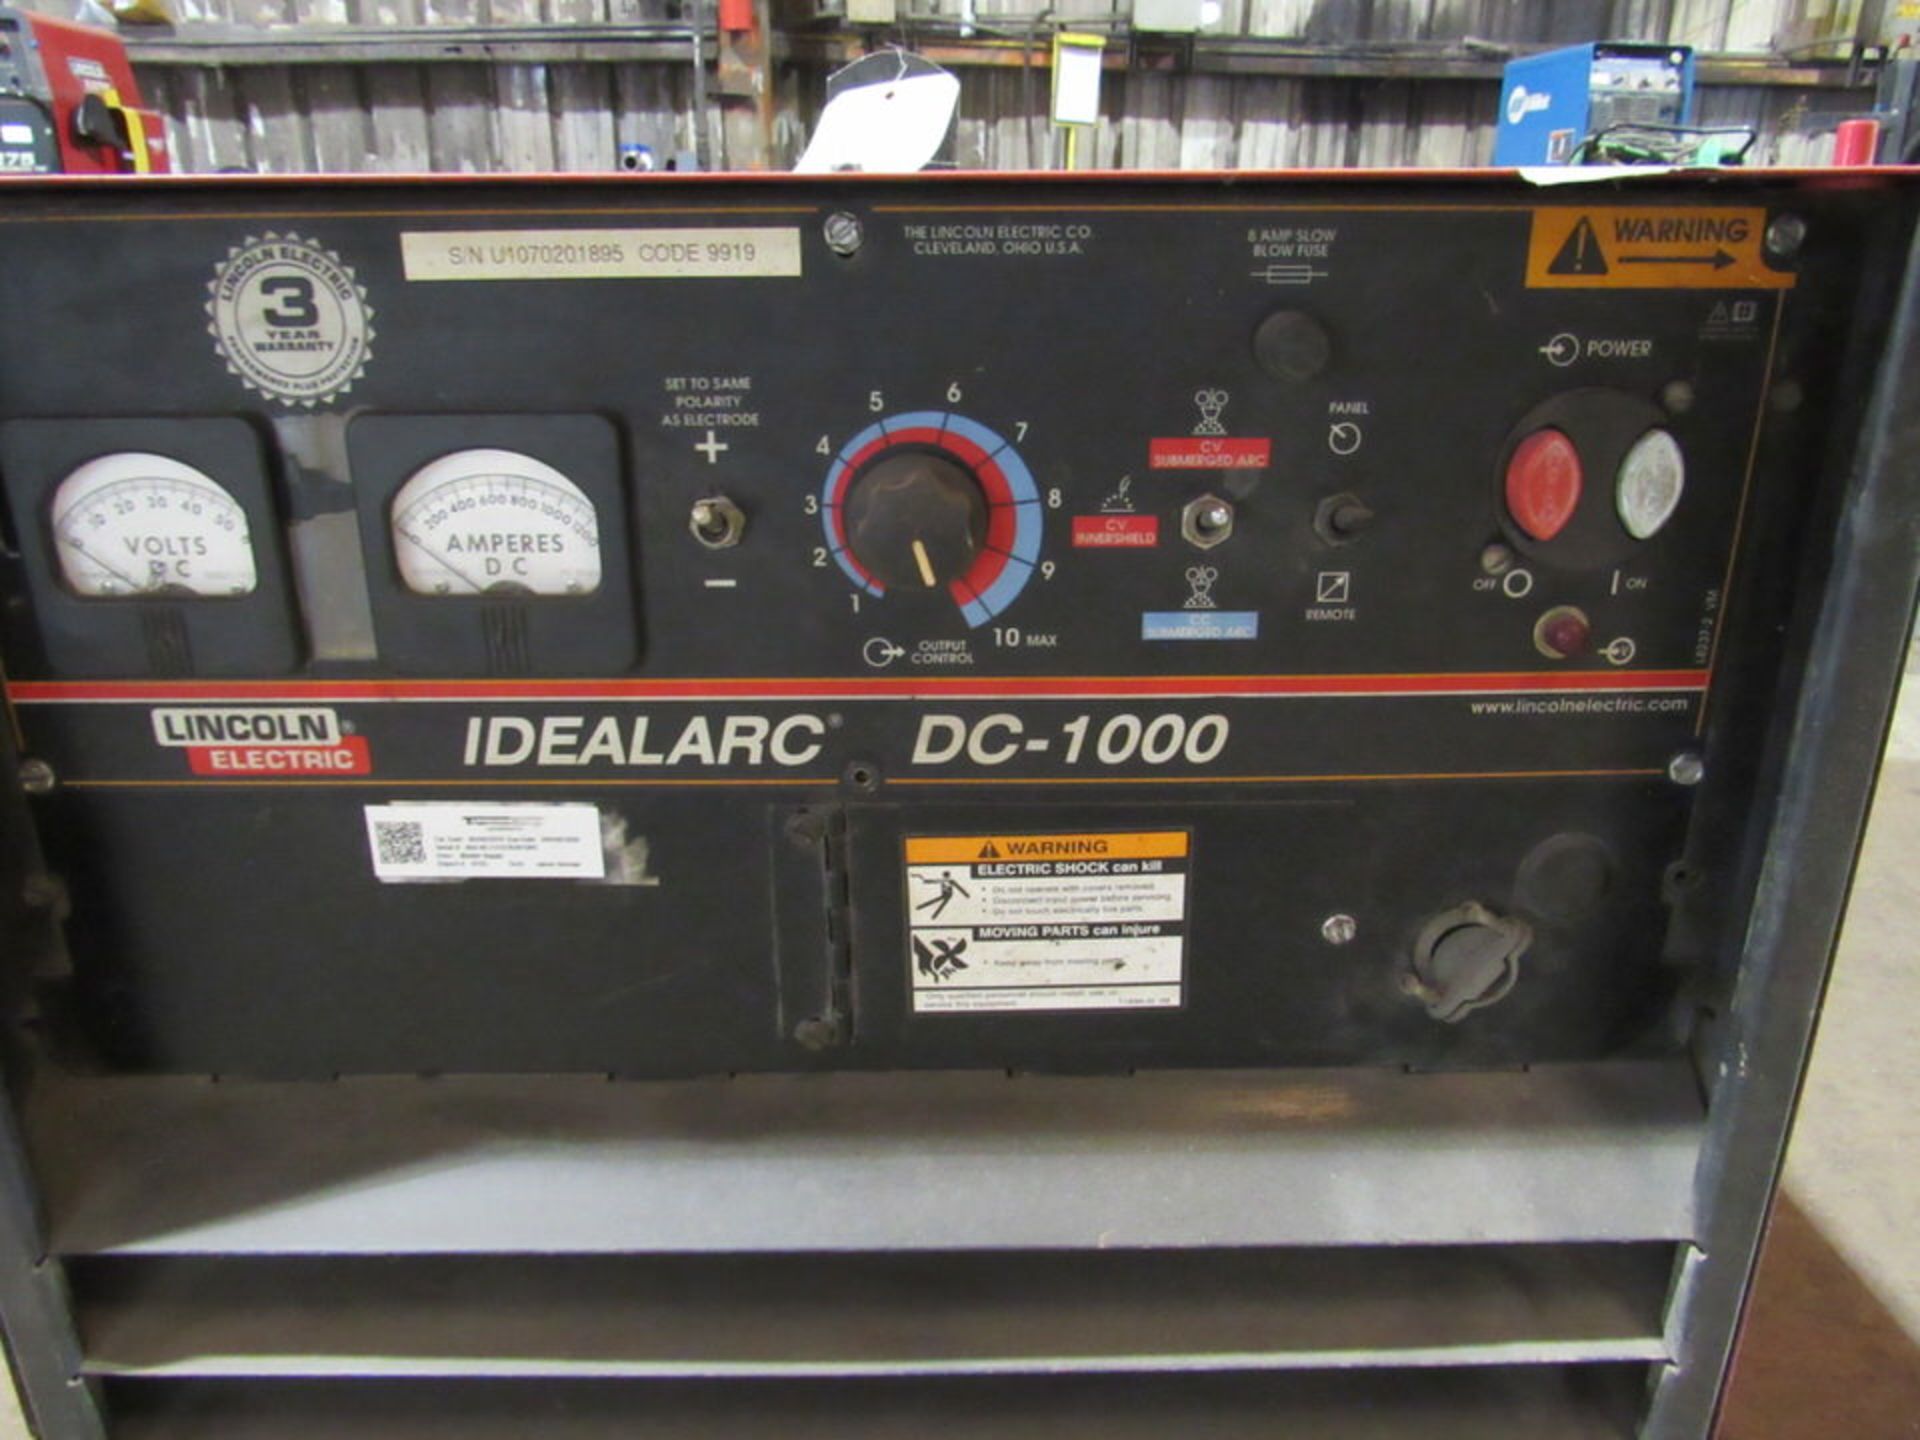 Lincoln Idealarc DC-1000 Welding Power Source - Image 4 of 6